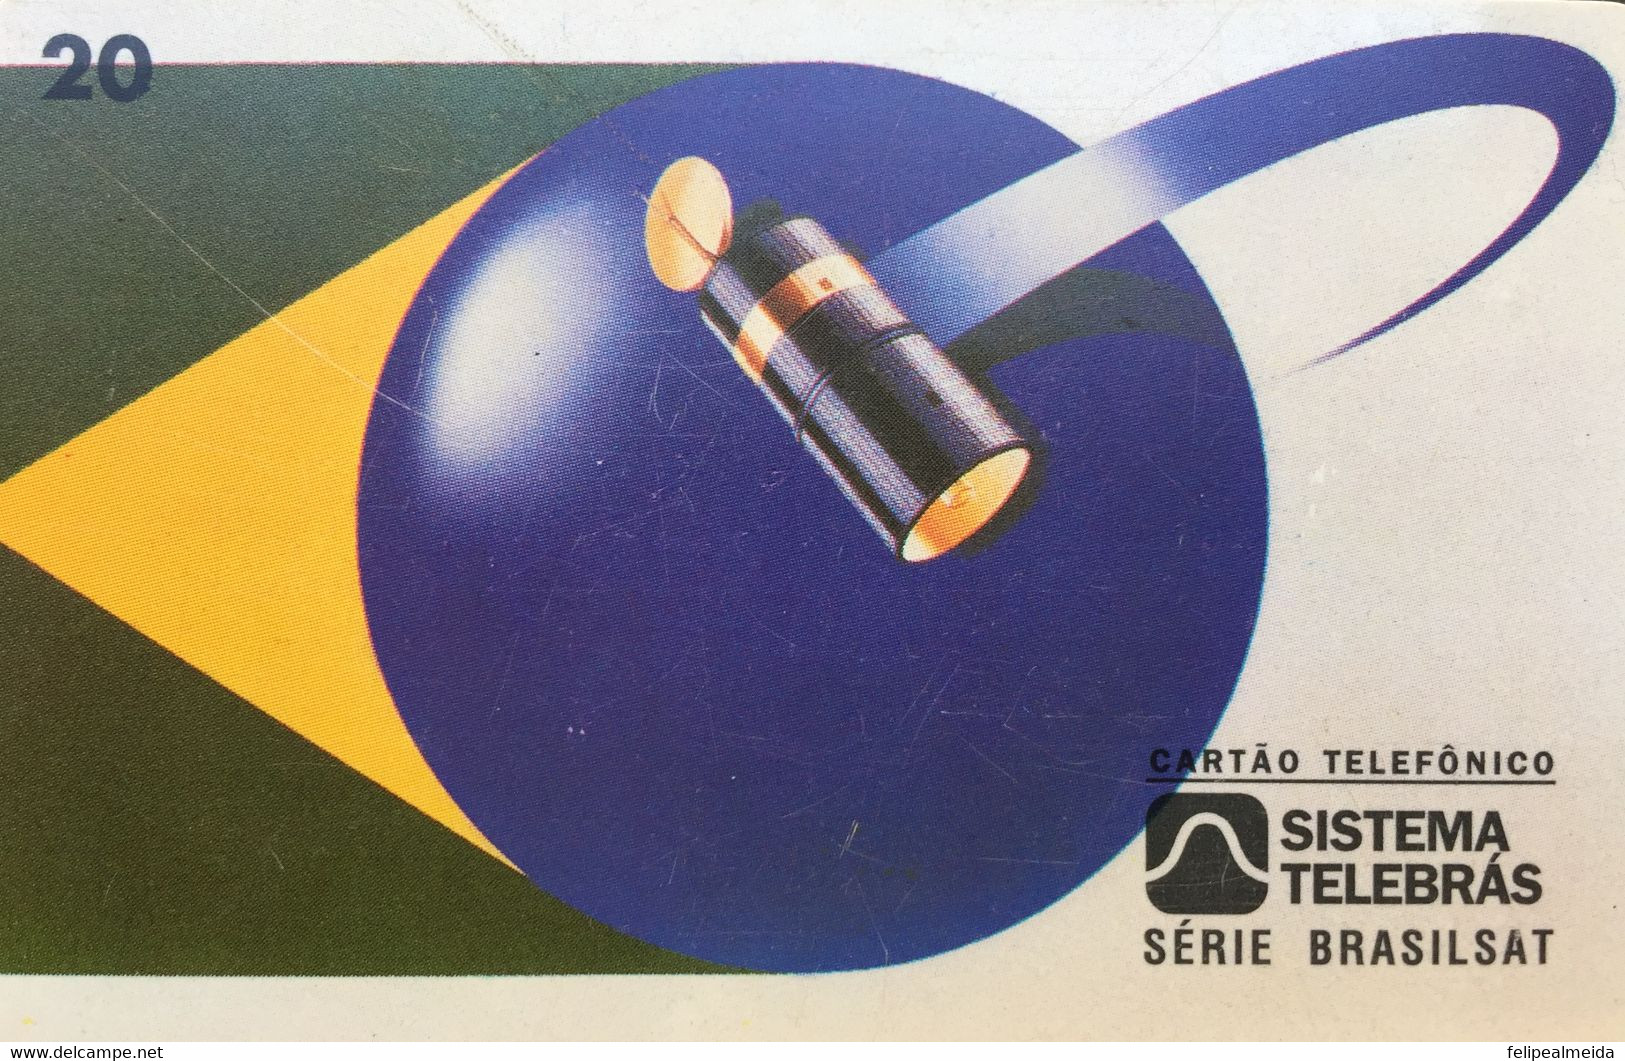 Phone Card Made By Telebras In 1997 - Series Brasilsat - On February 28, 1994, Brazil Launched The Second Generation Of - Espacio